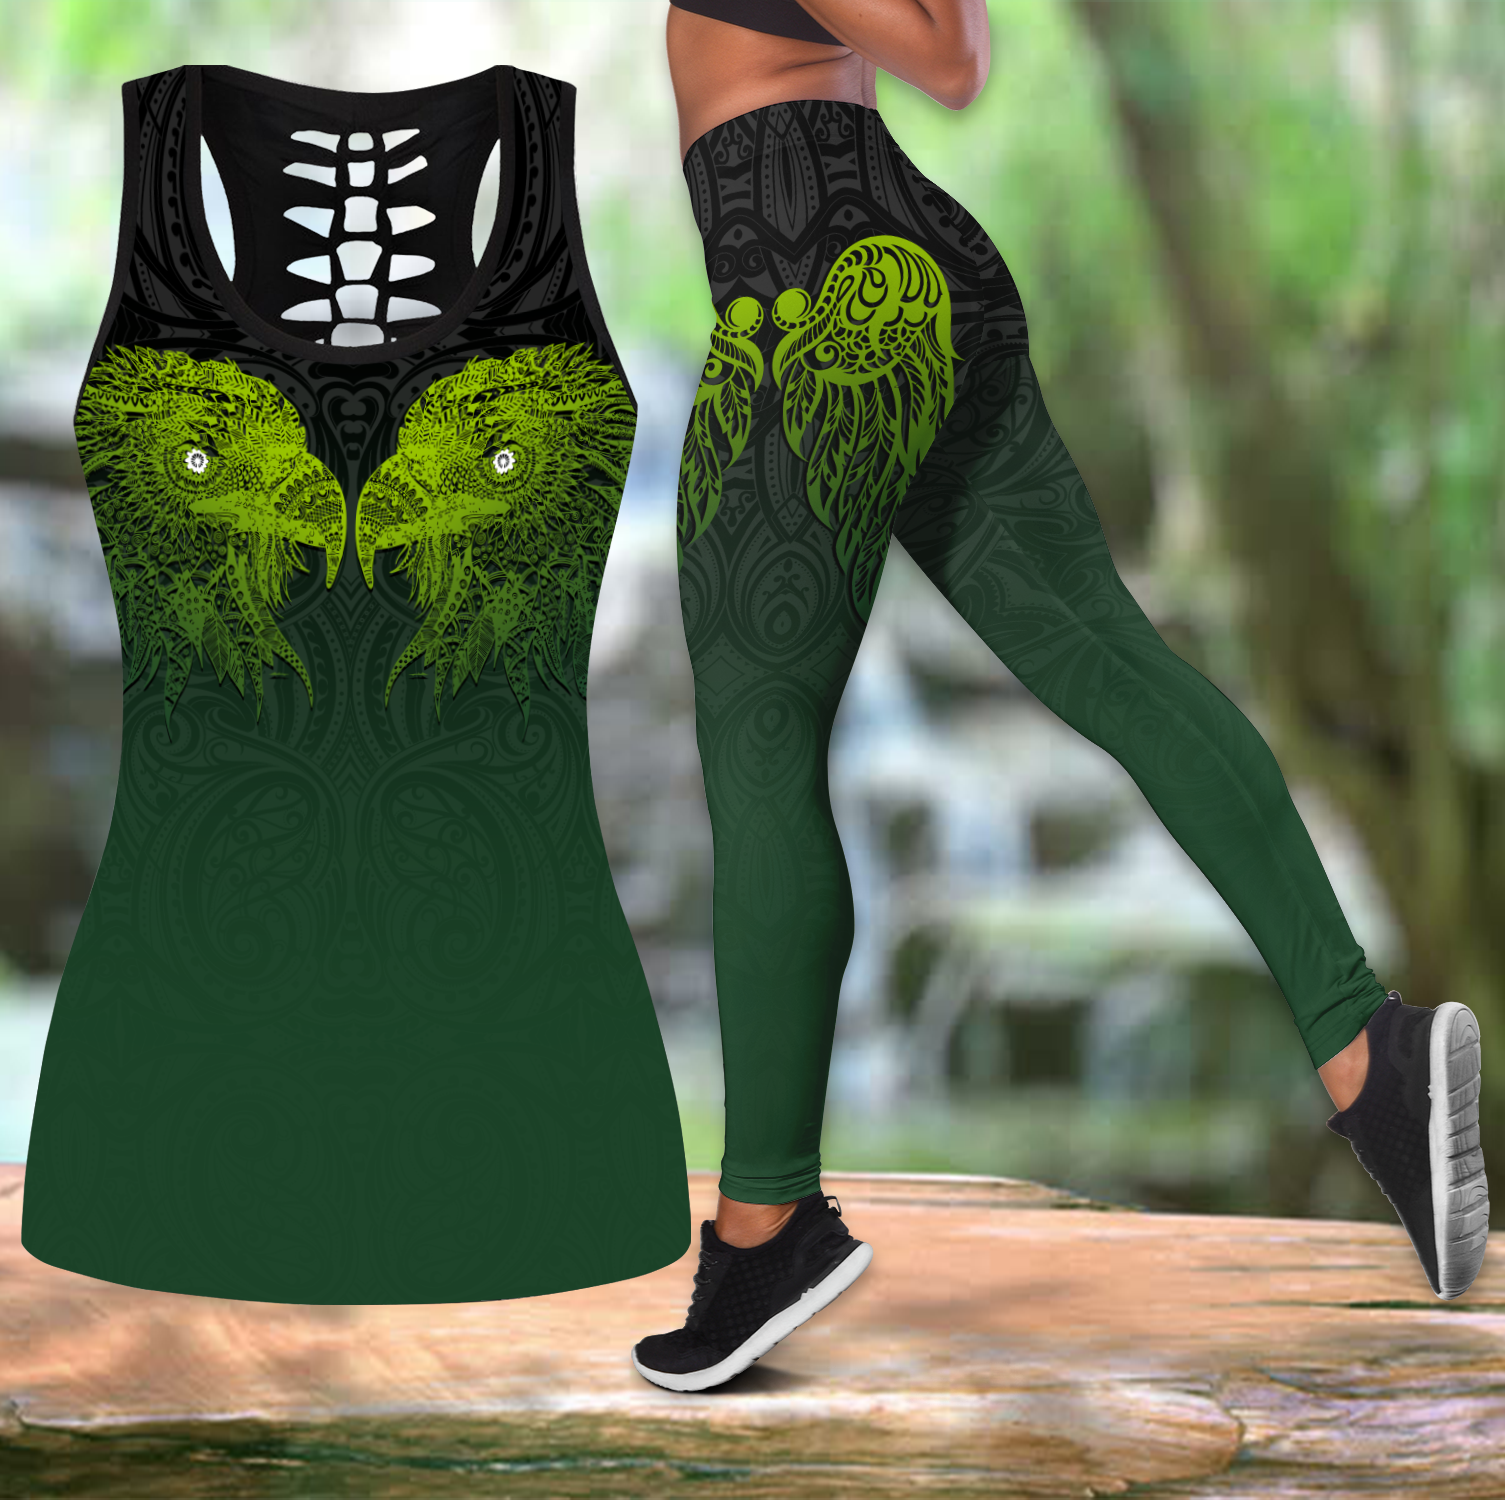 Combo Aotearoa Maori New zealand tank top & leggings outfit for women-Apparel-PL8386-S-S-Vibe Cosy™